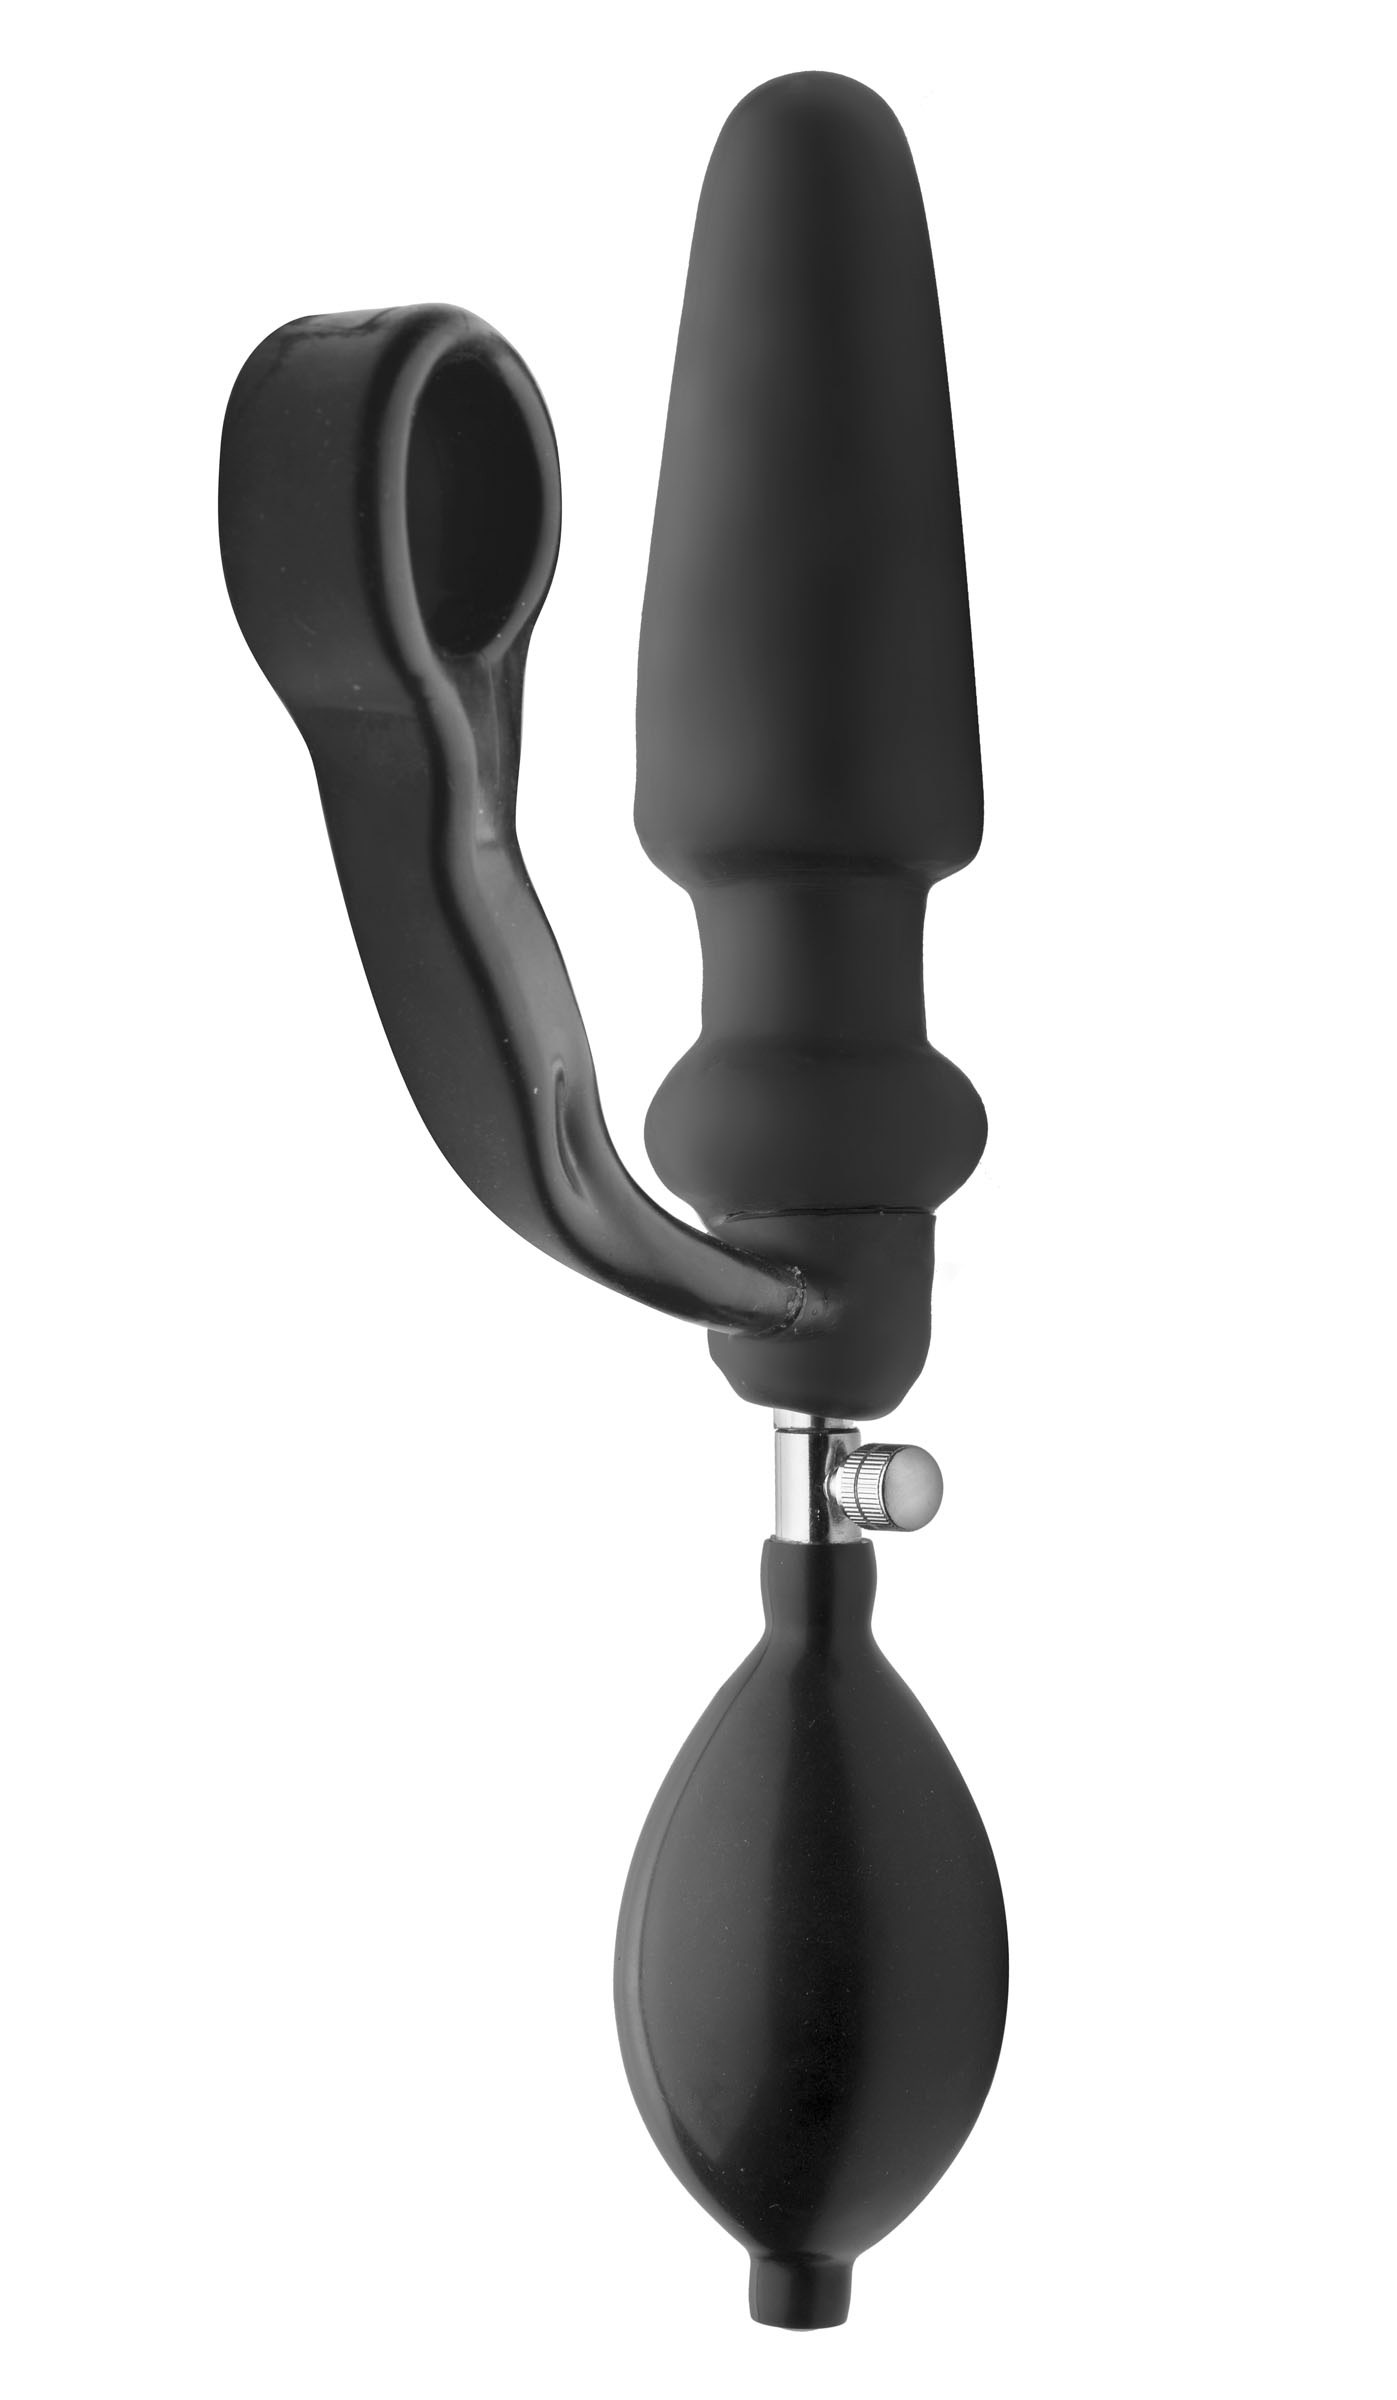 Exxpander+Inflatable+Plug+with+Cock+Ring+and+Removable+Pump